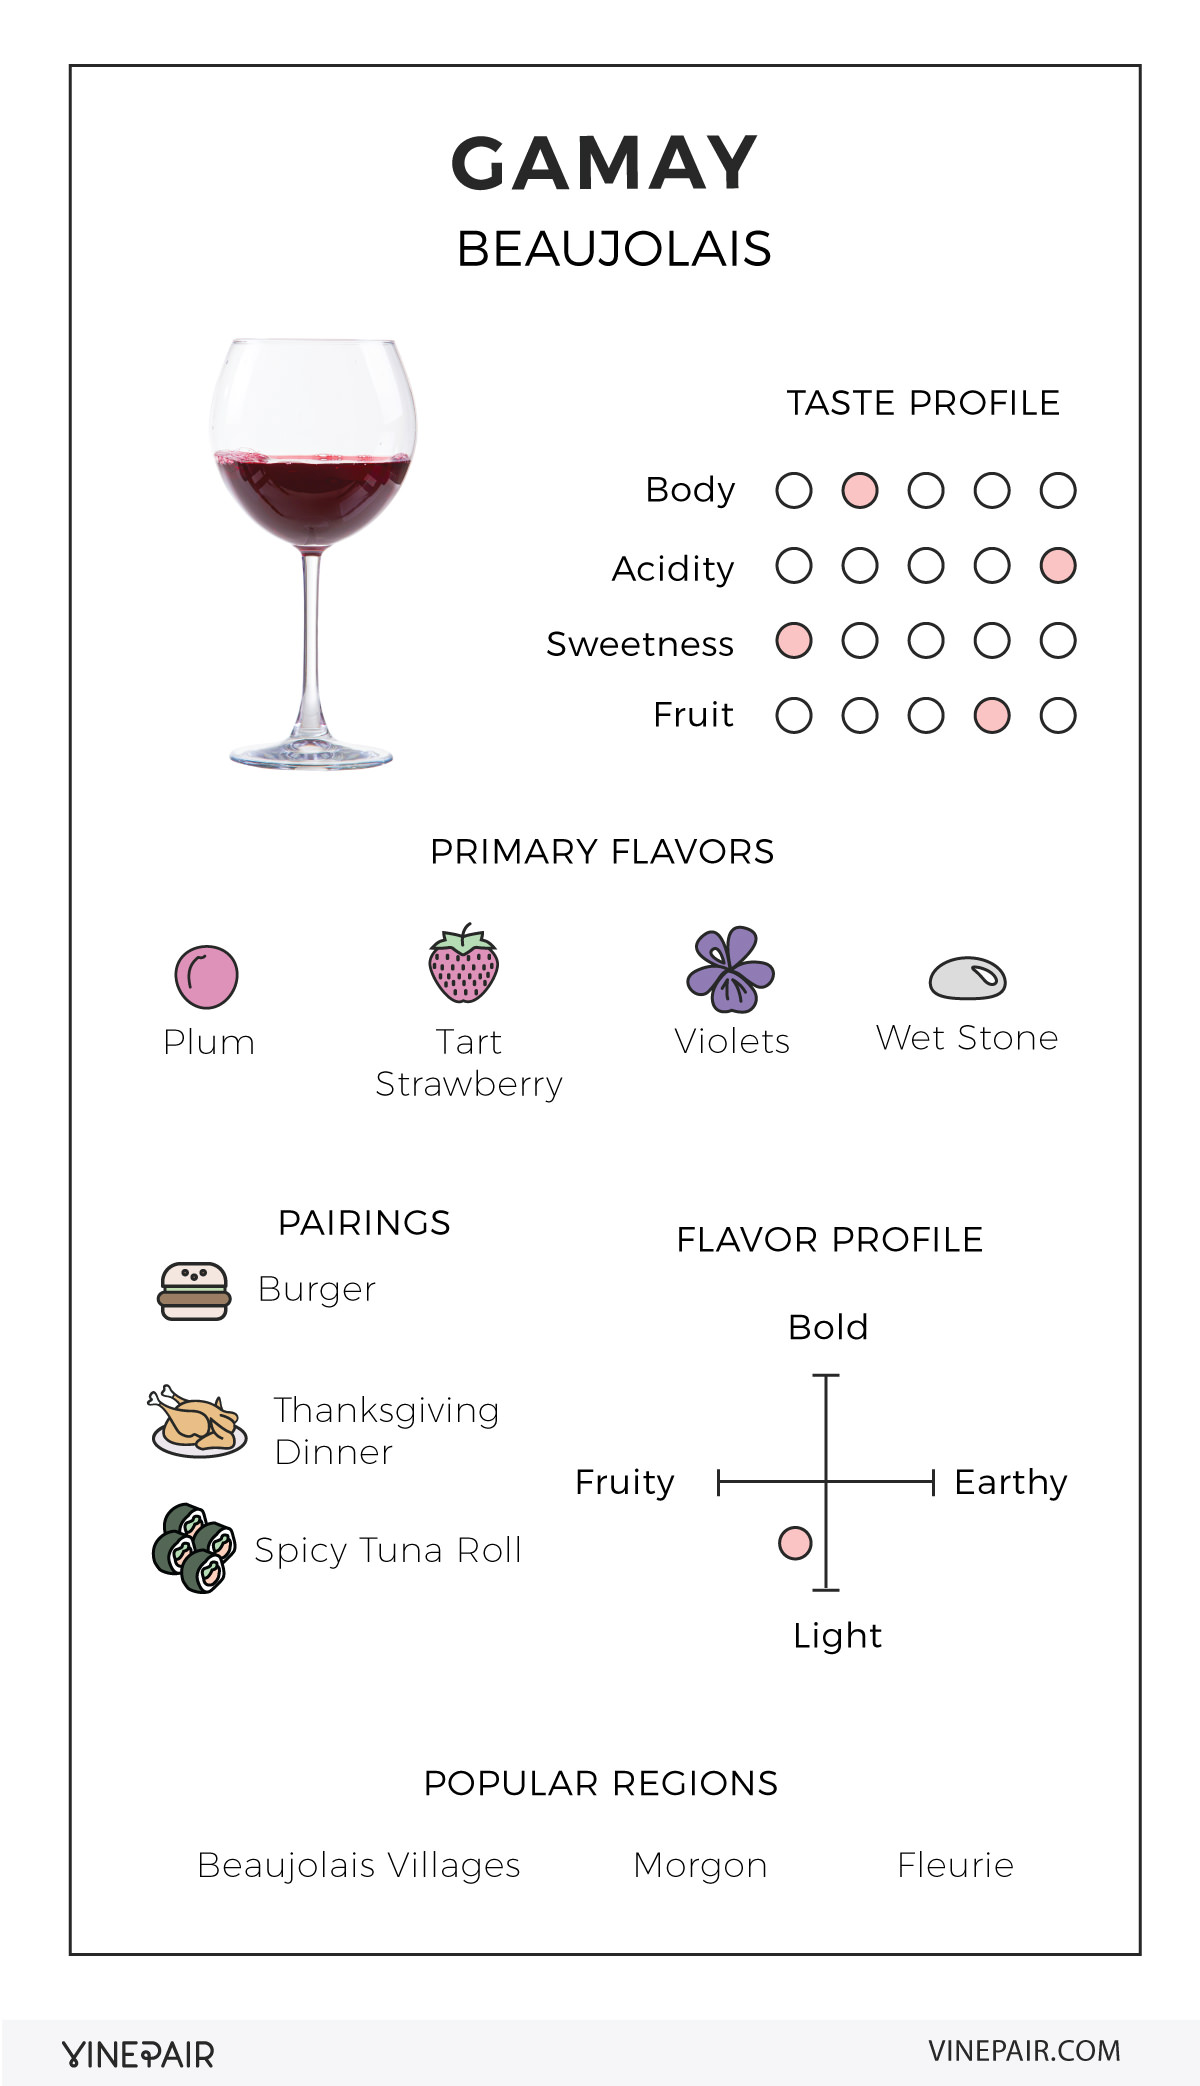 An Illustrated Guide to Gamay from Beaujolais